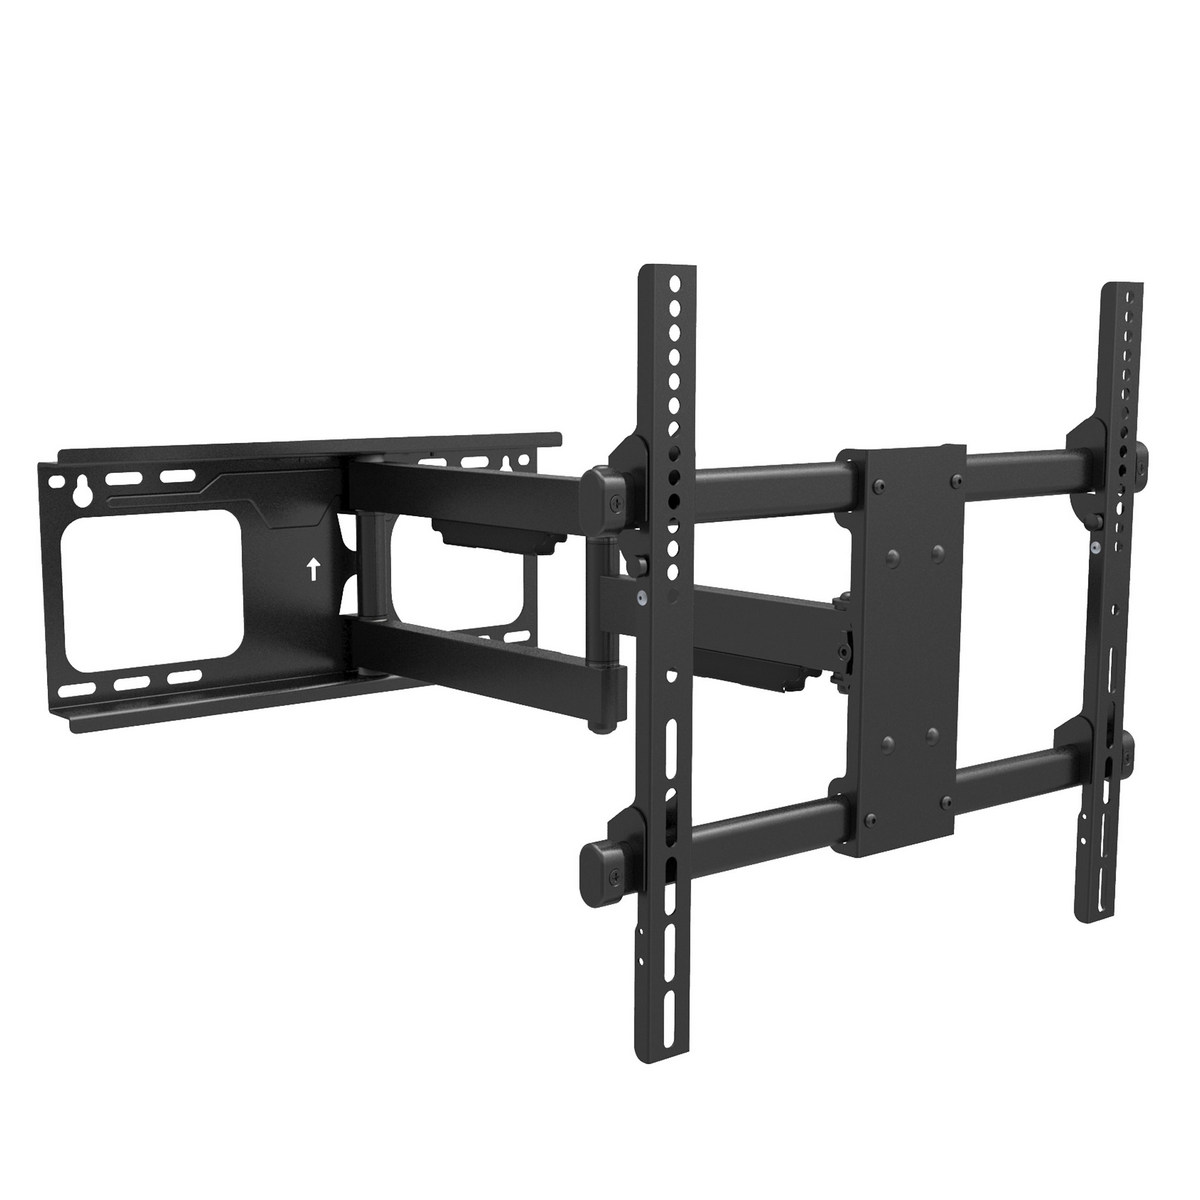 Corliving Mpm-801-a Full Motion Flat Panel Wall Mount For Tvs Up To 70"